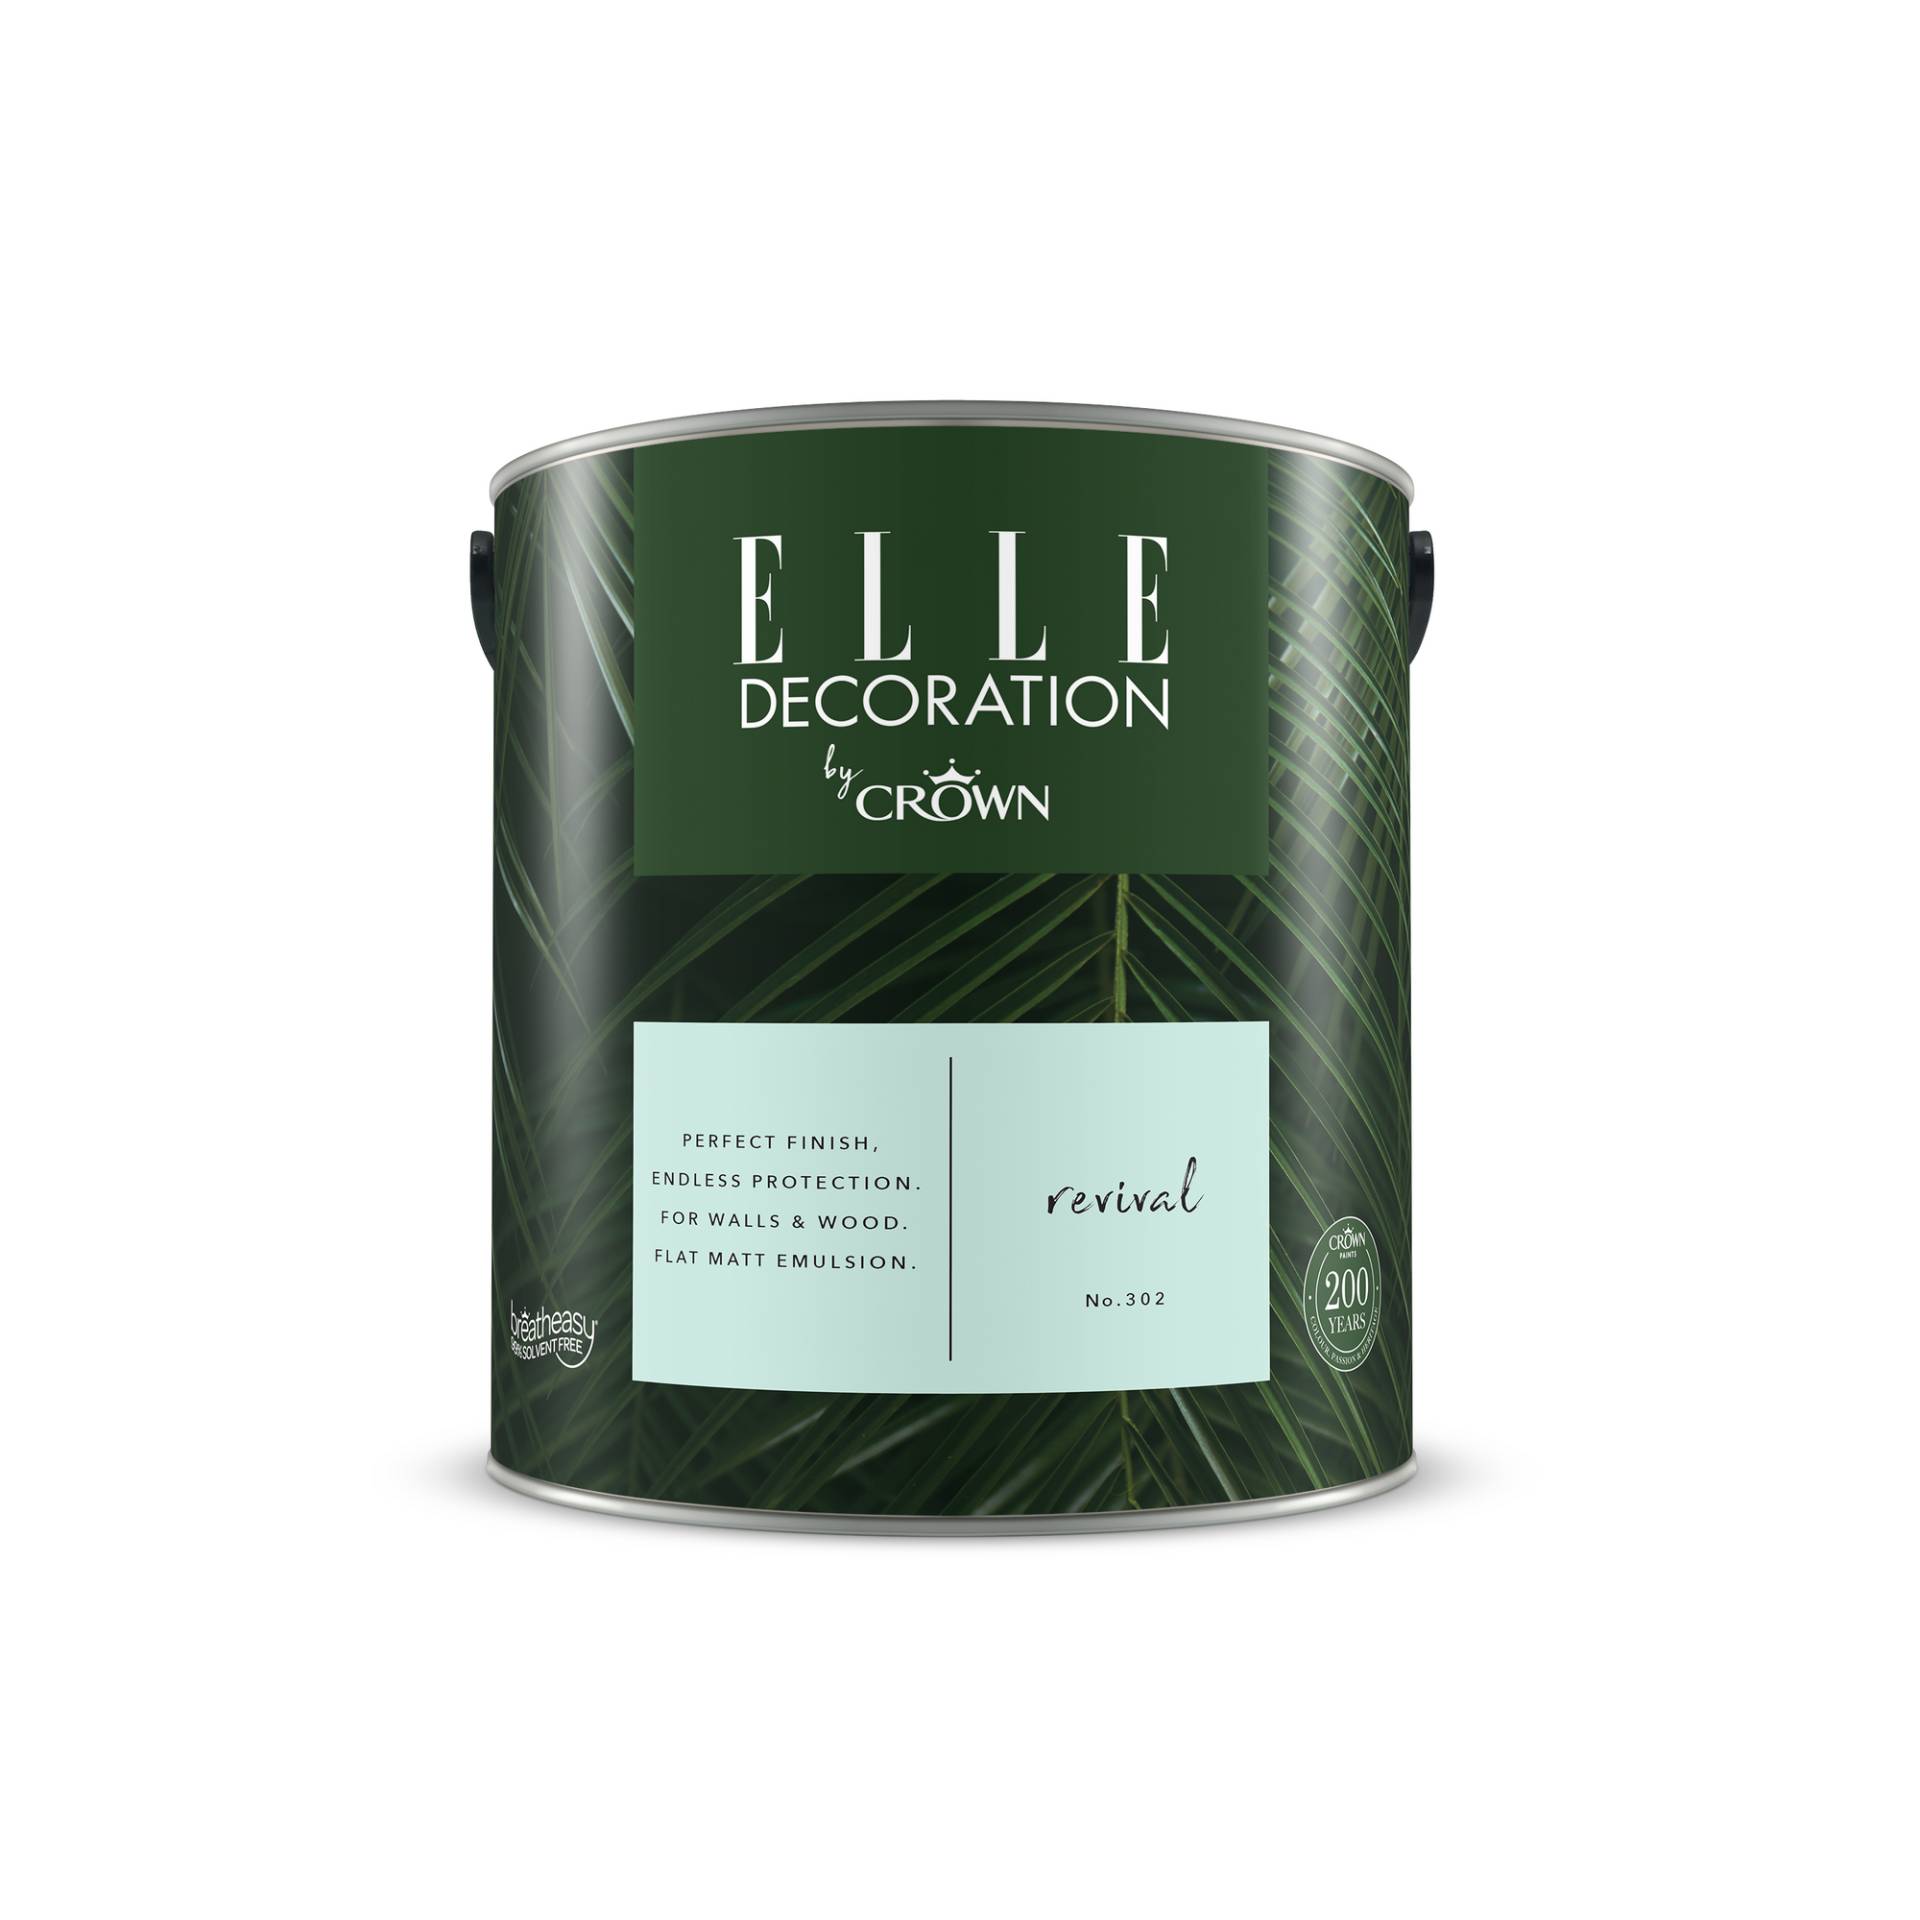 ELLE Decoration by Crown Wandfarbe 'Revival No. 302' türkis matt 2,5 l von ELLE Decoration by Crown